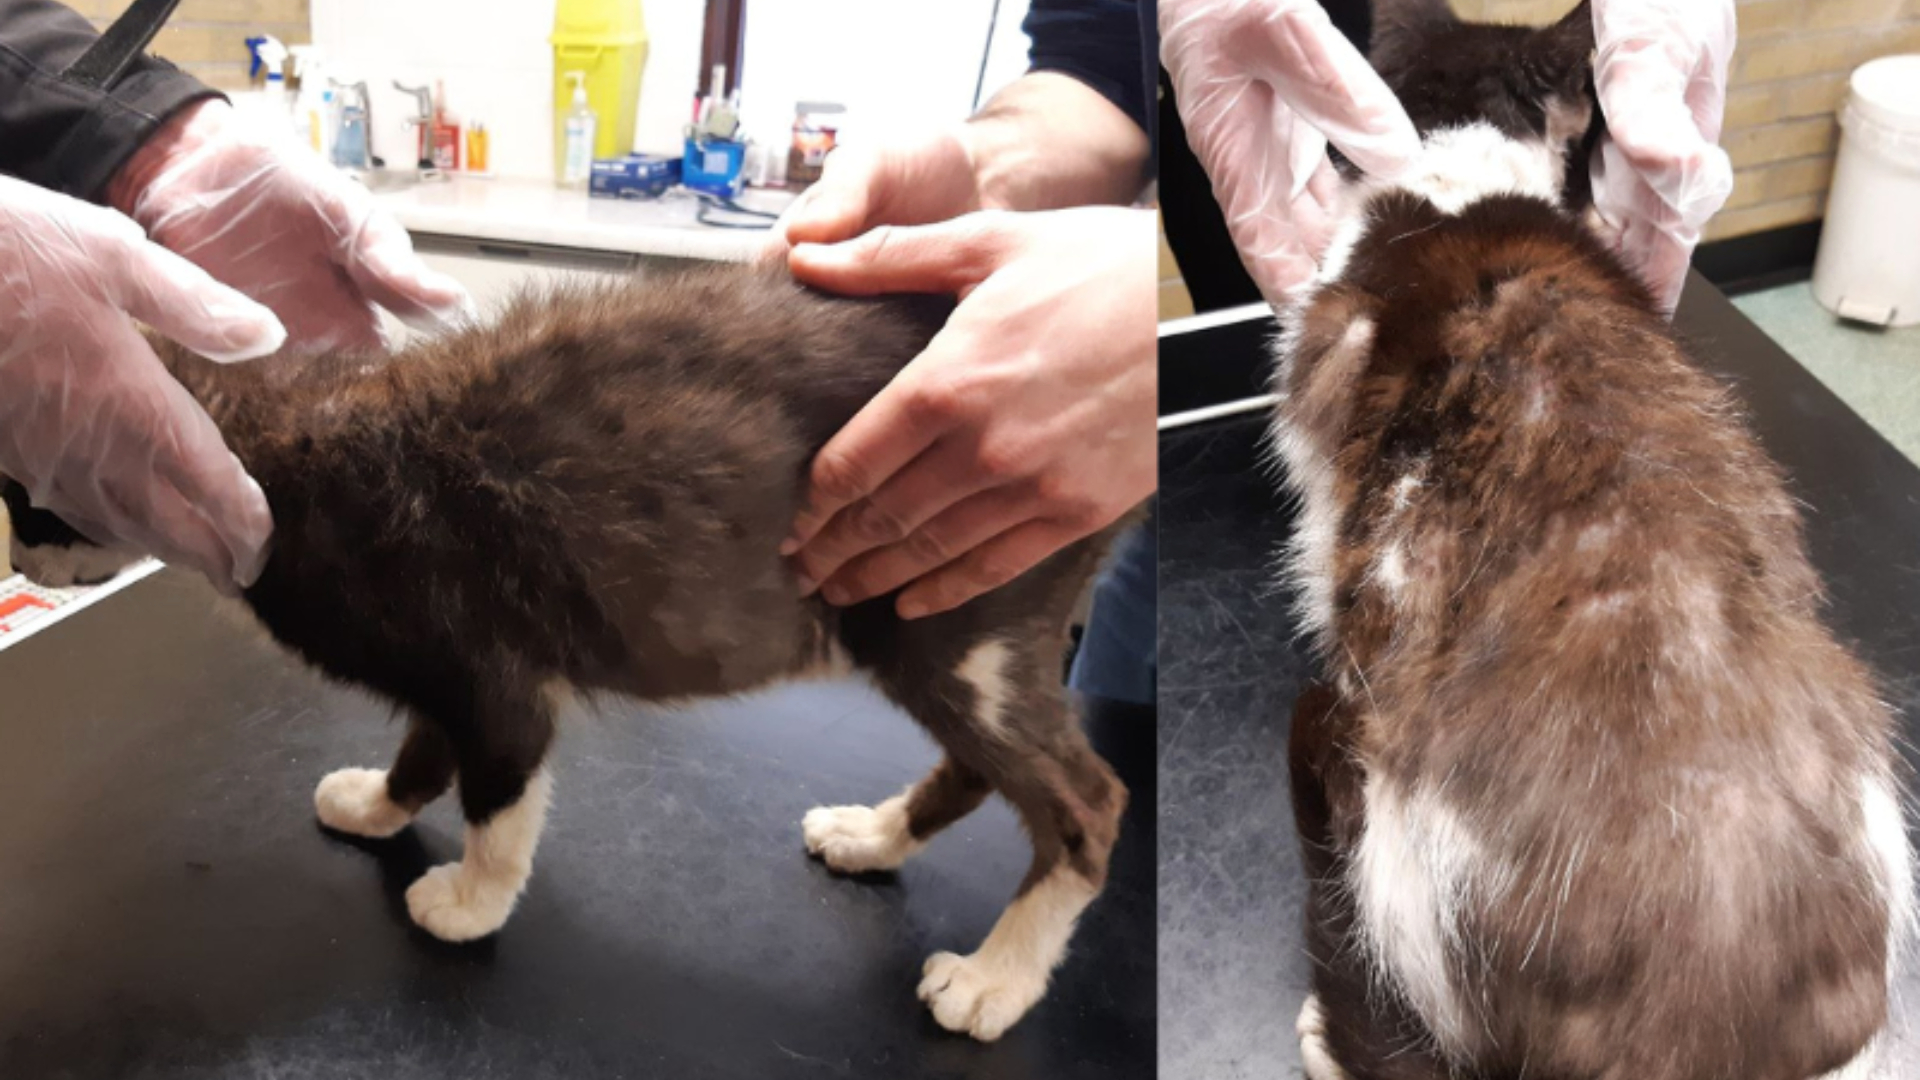 Two cats, both aged seven years old and named Ruff and Tumble, were suffering from sore and irritated skin and had significant hair loss.